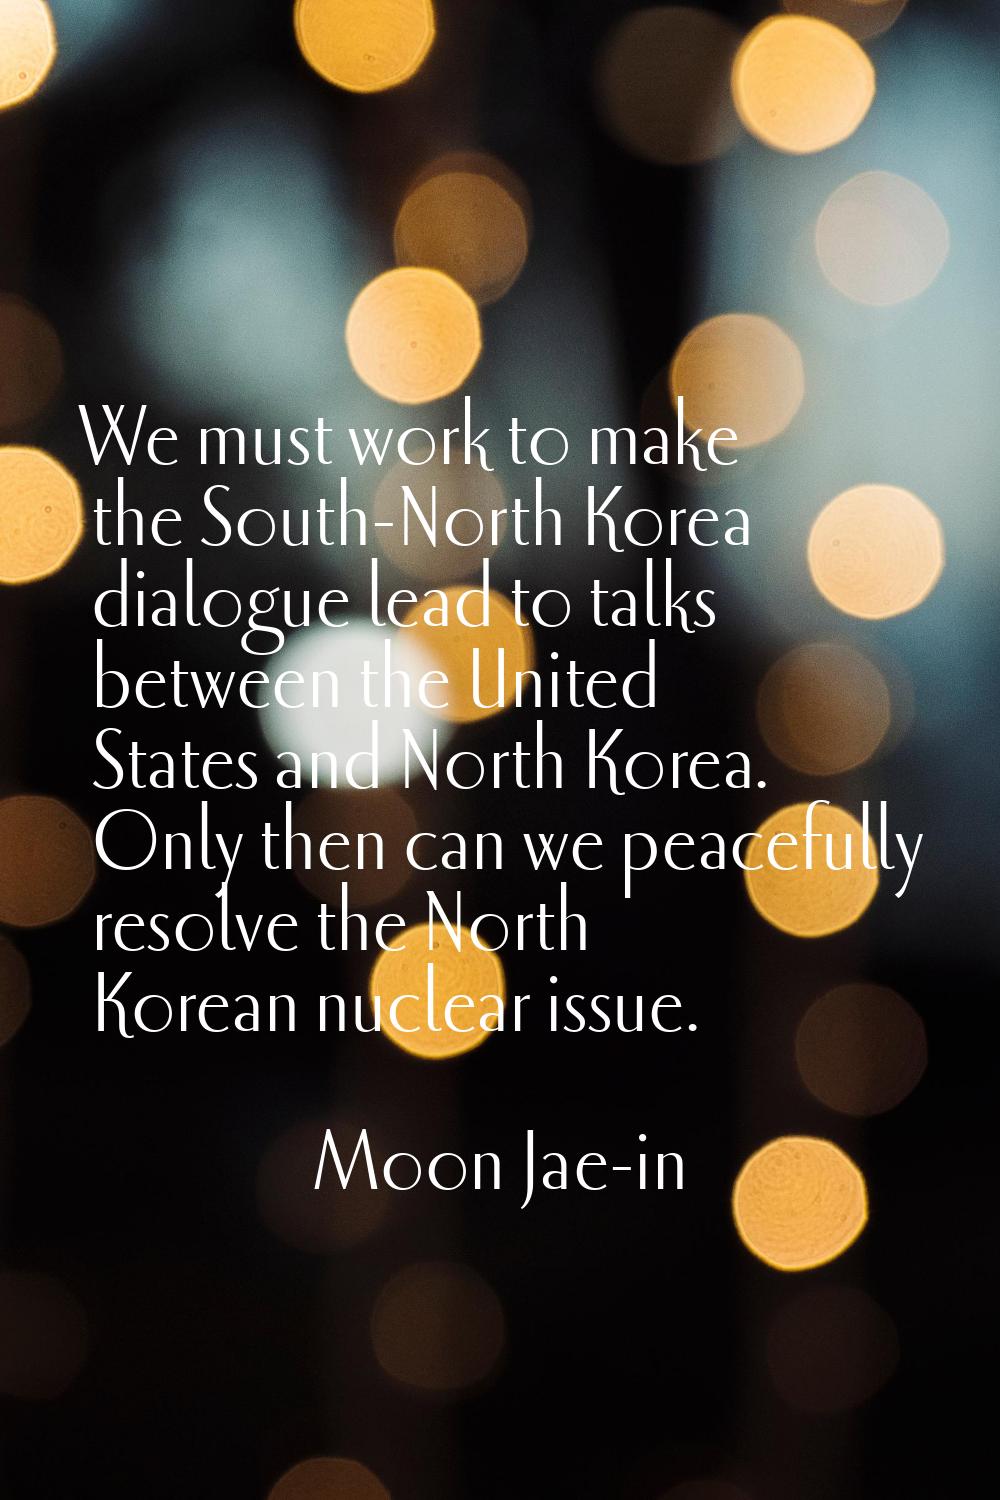 We must work to make the South-North Korea dialogue lead to talks between the United States and Nor